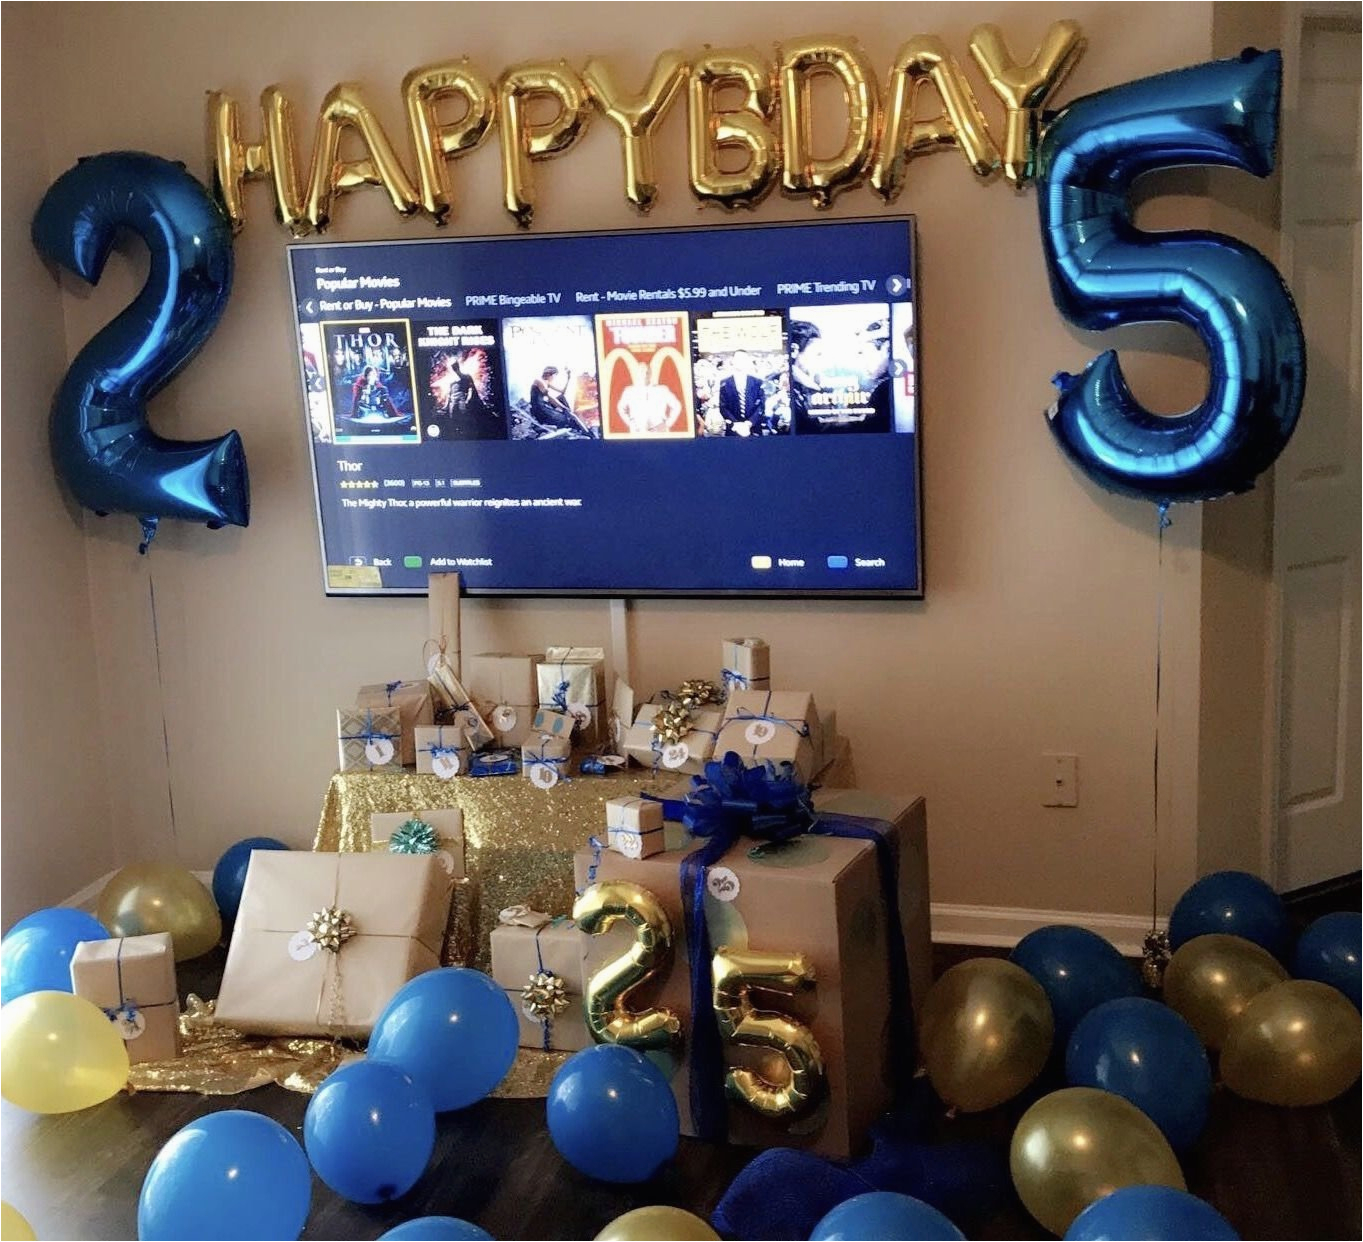 Creative Birthday Presents for Him 10 Most Recommended 25th Birthday Ideas for Boyfriend 2019